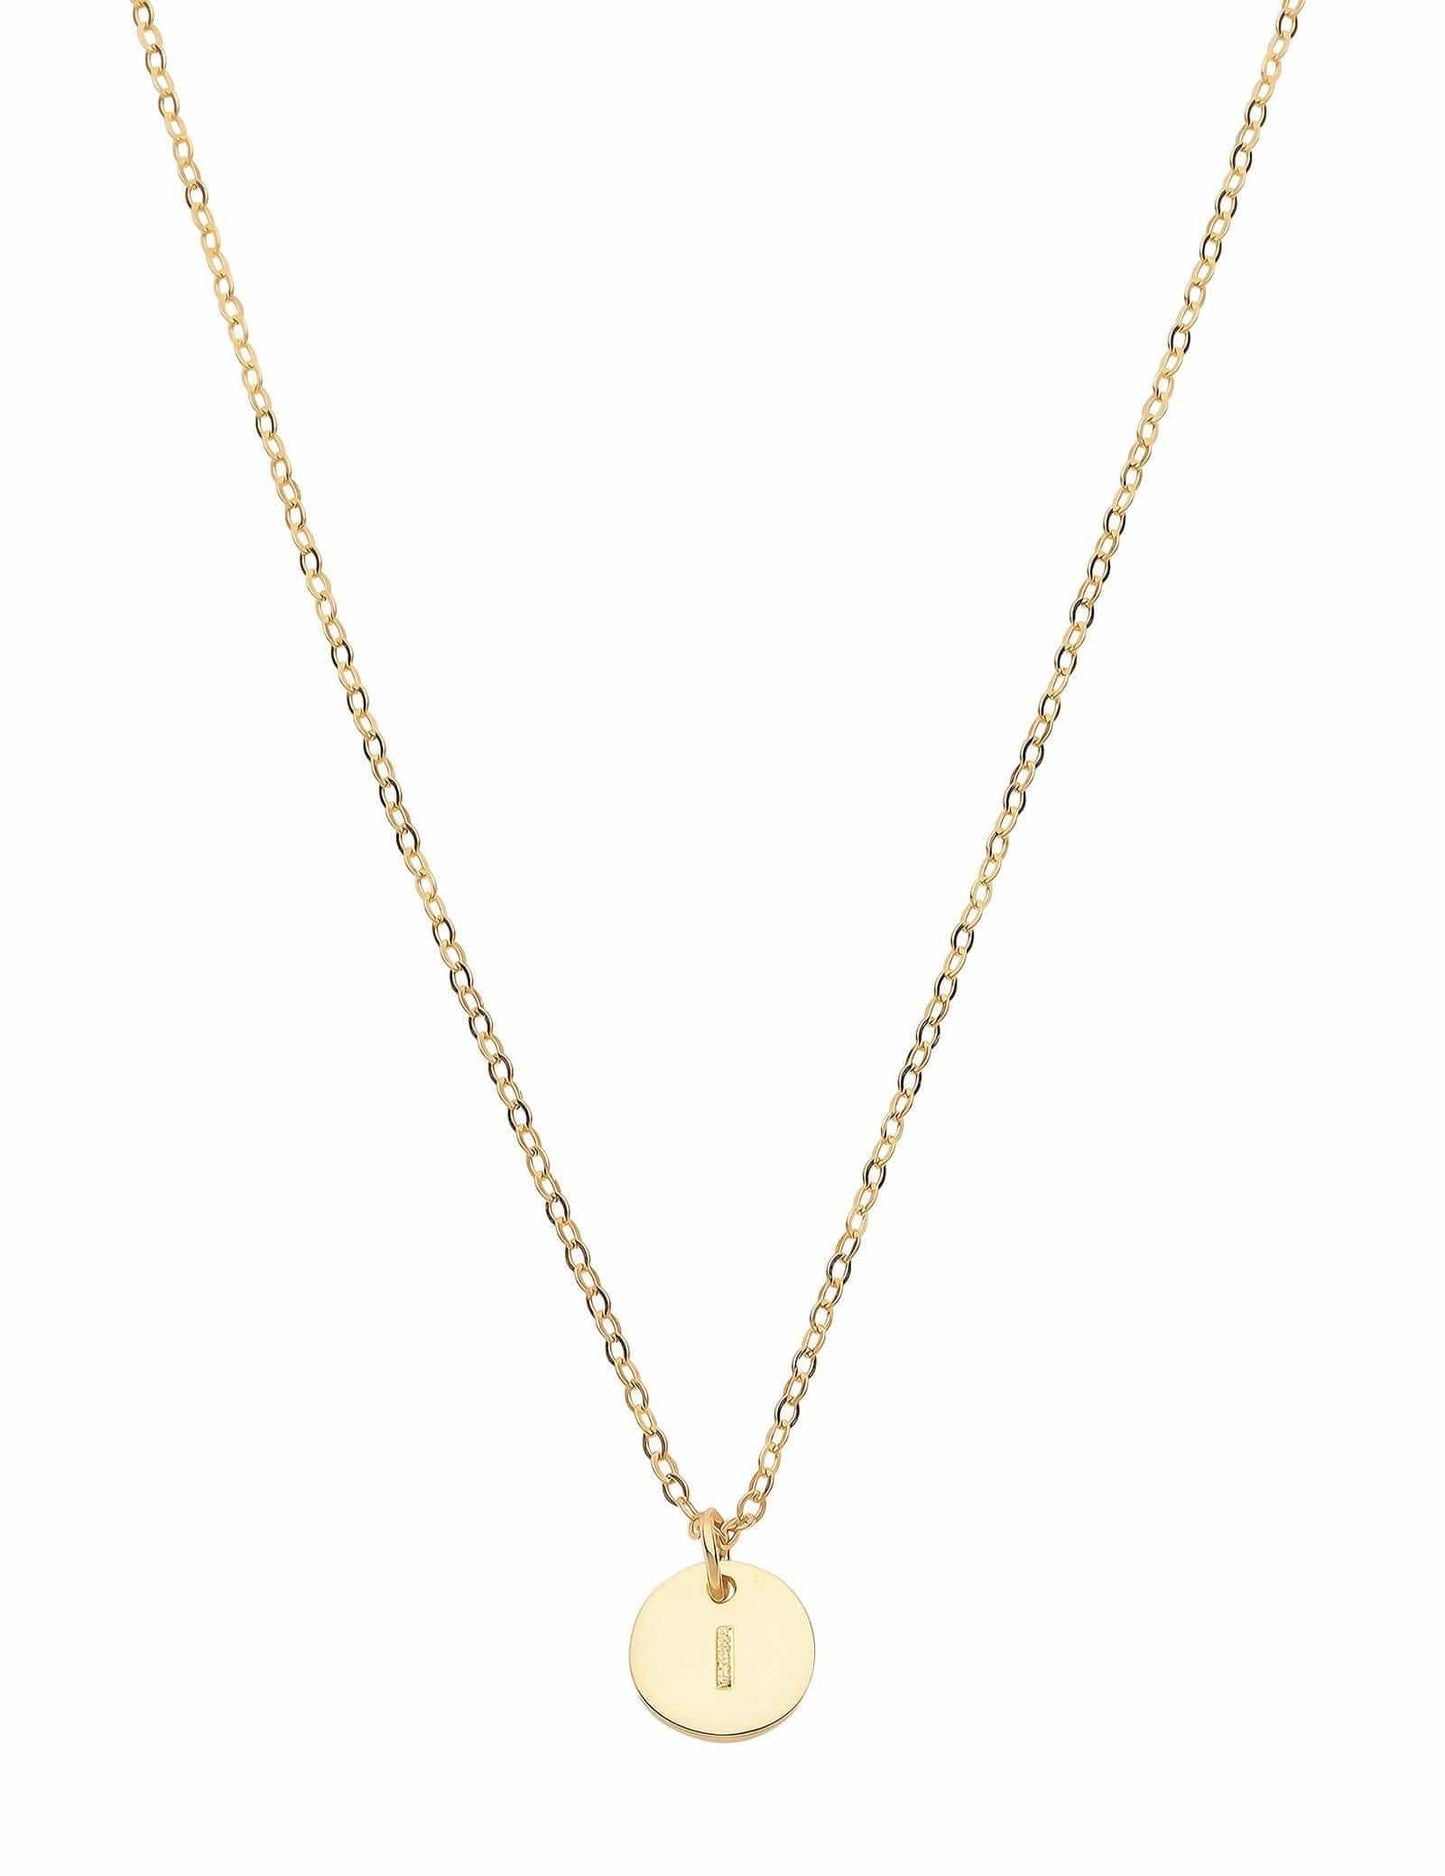 Dear Addison Yellow Gold Letter I Necklace